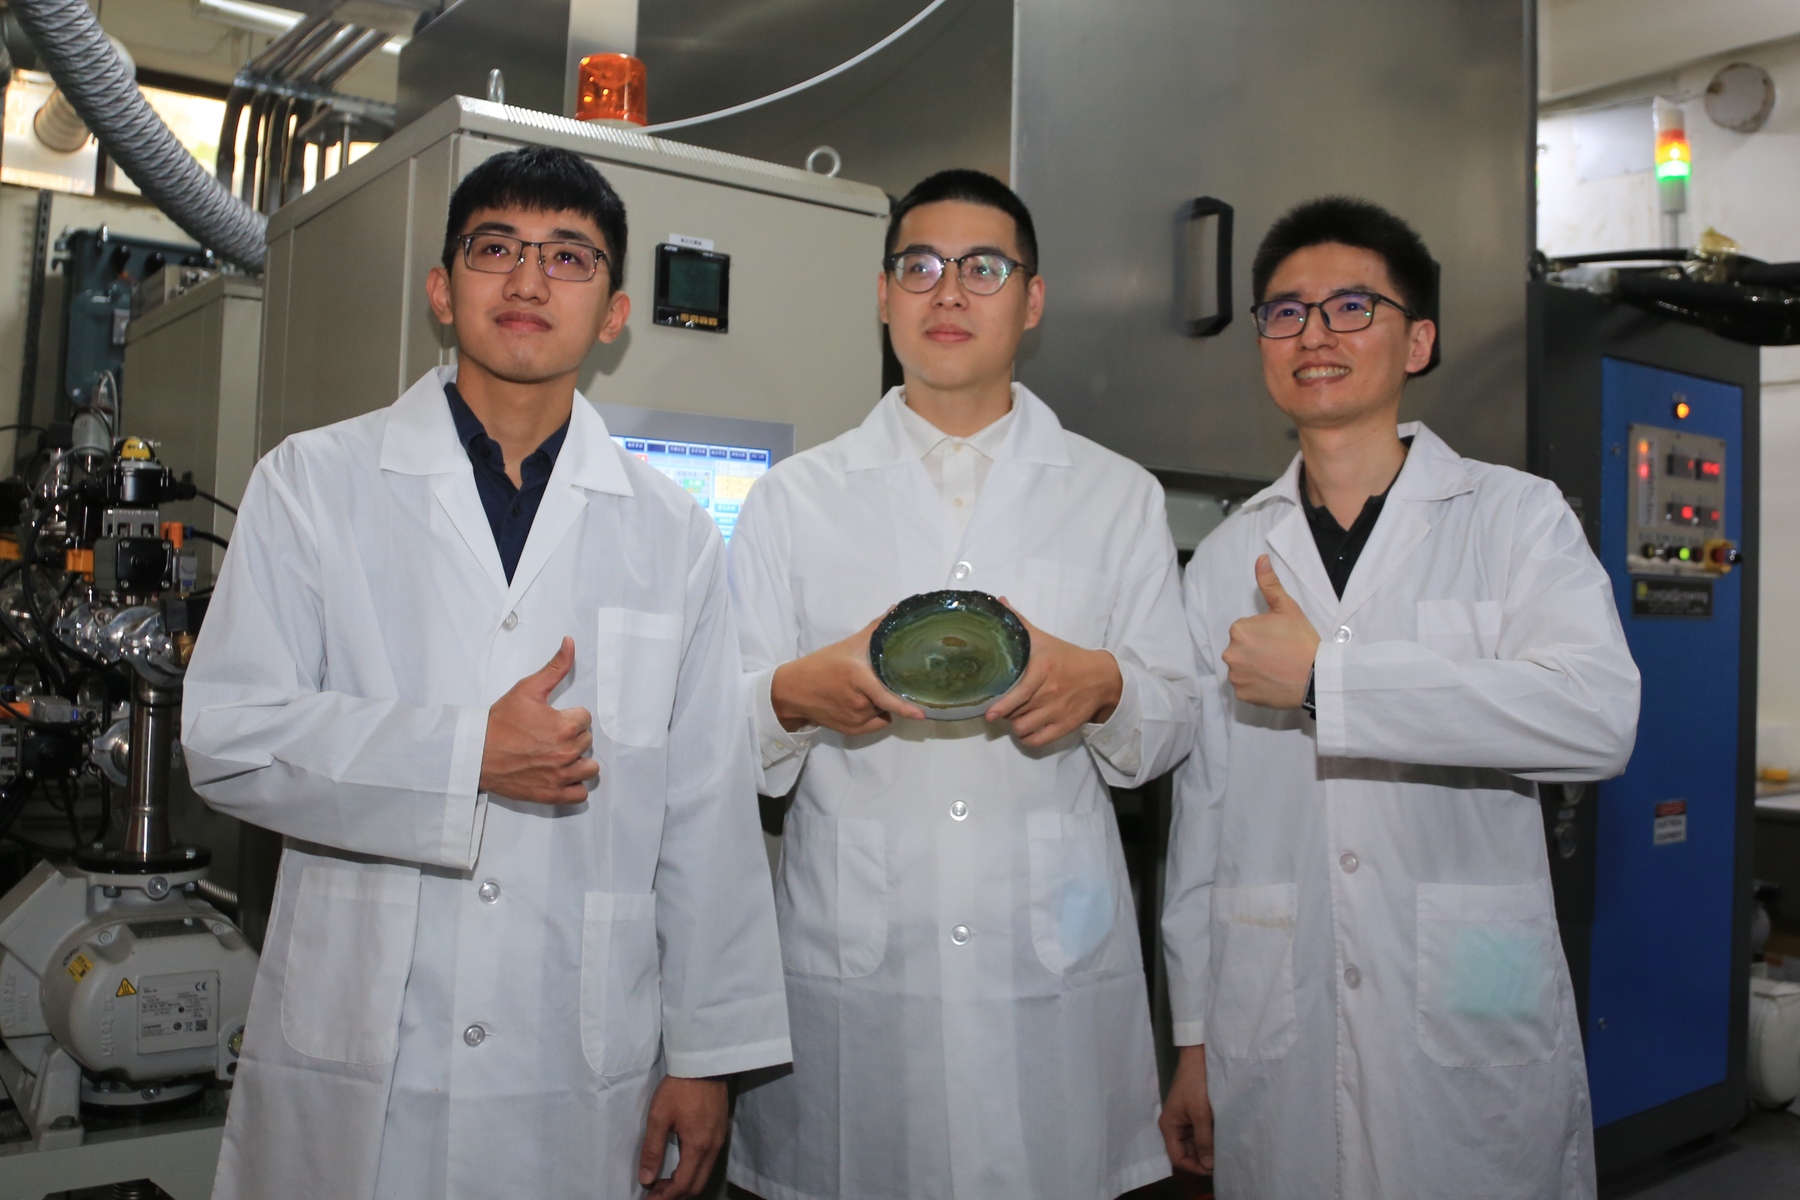 Ahead of its peers in Taiwan, the Center of Crystal Research at National Sun Yat-sen University (NSYSU) announced the successful development of N-Type 4H 6-inch SiC monocrystalline. Left to right: the graduate student Chen-Yang, Chang, Yung-Wang, Cheng and the postdoctoral research fellow Chu-An, Lee.